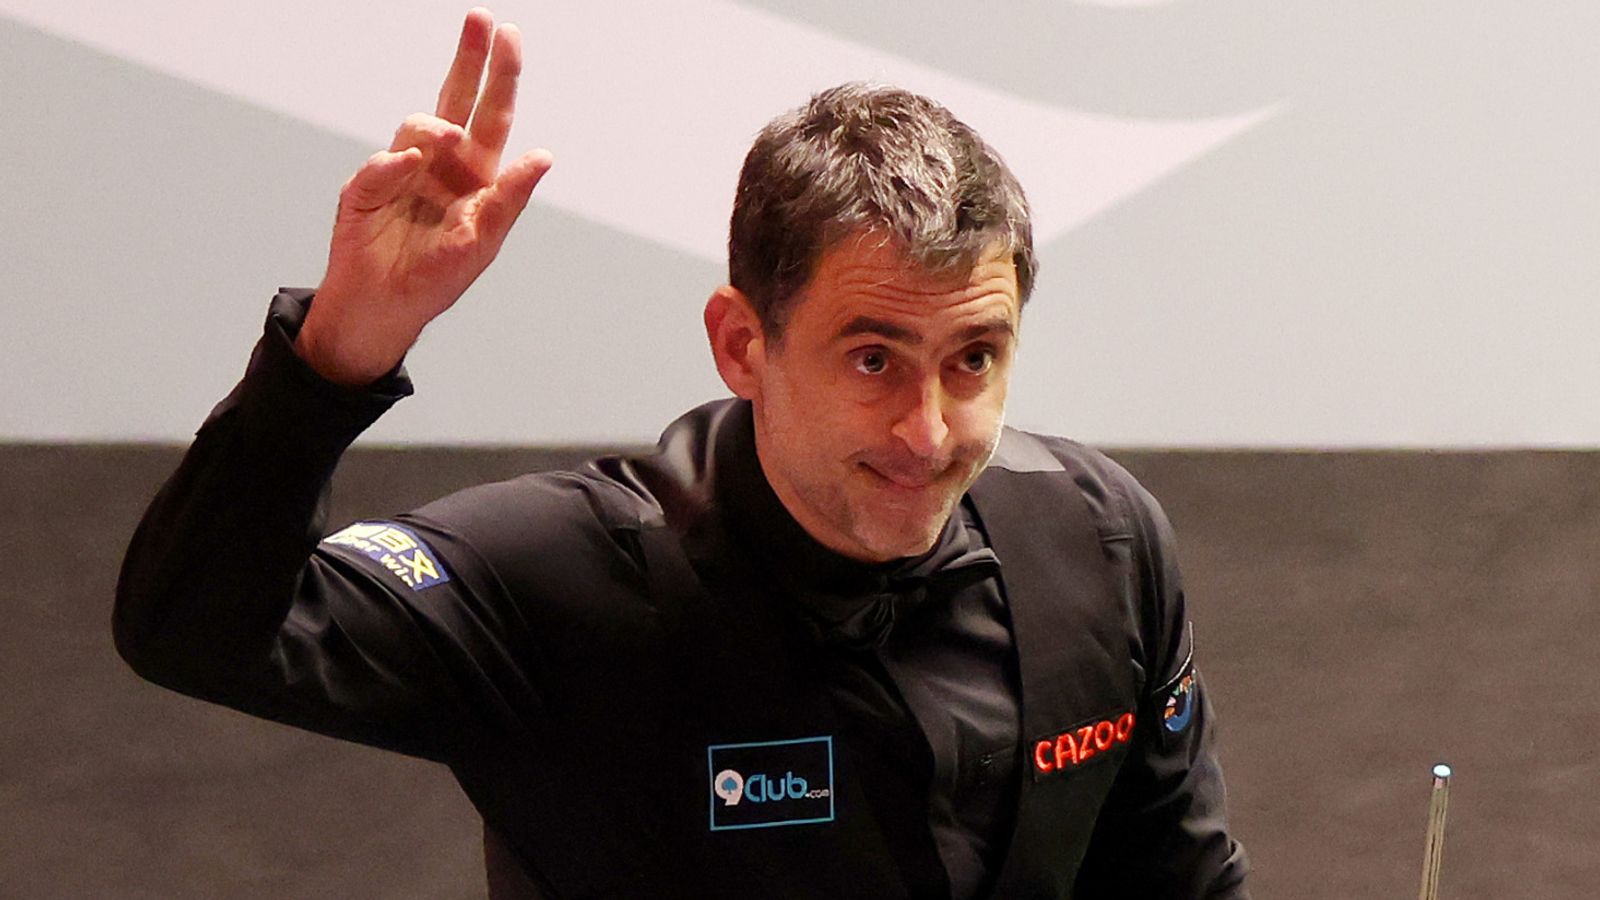 Ronnie O’Sullivan: ‘The Rocket’ on course for eighth World Snooker Championship after defeating Ryan Day | Snooker News